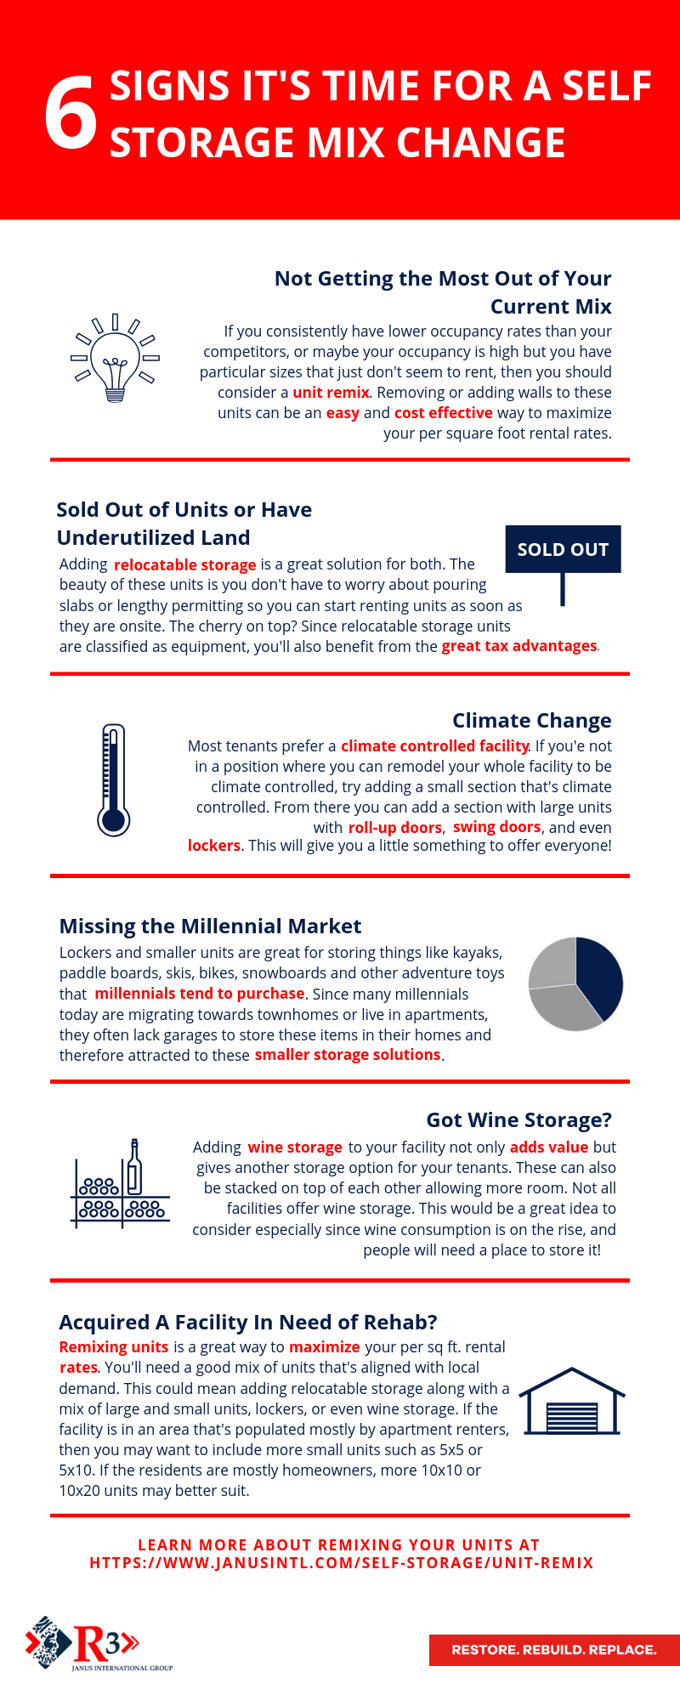 infographic with six signs its time for a self-storage mix change